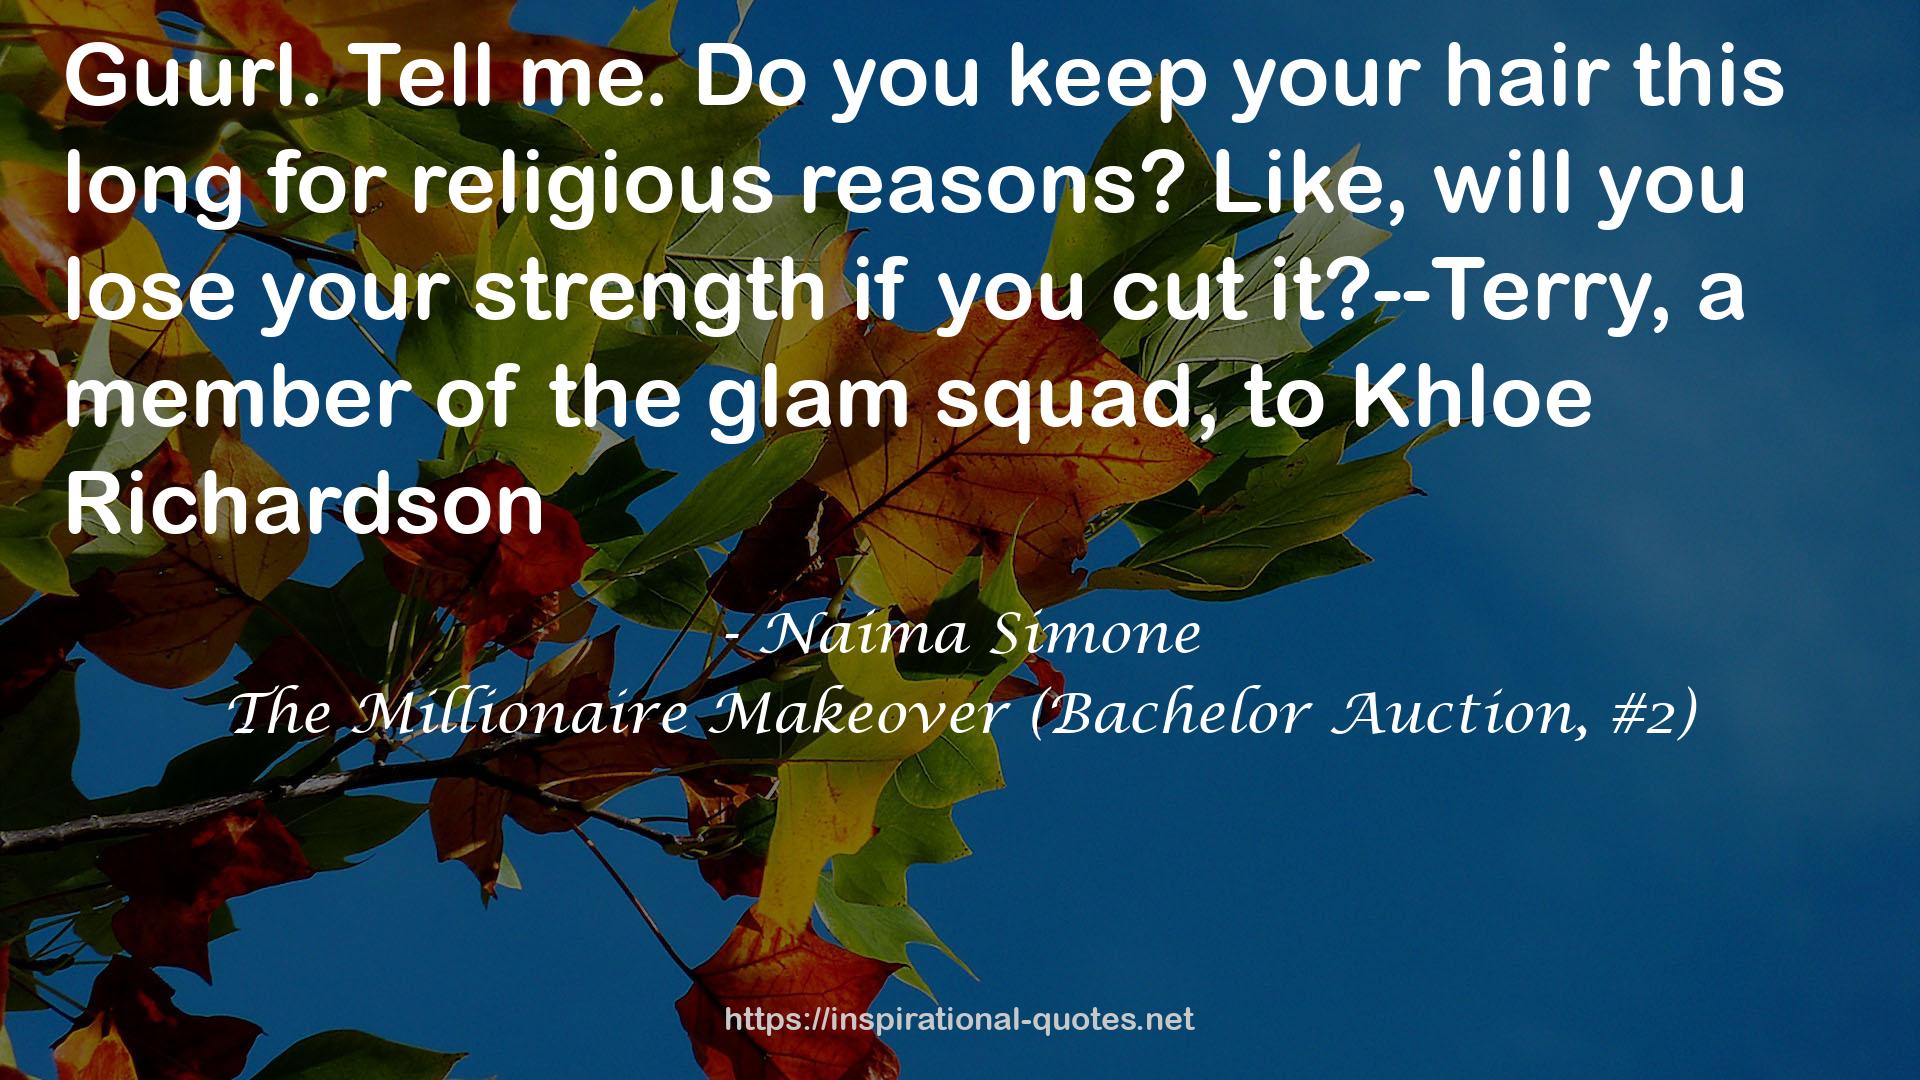 The Millionaire Makeover (Bachelor Auction, #2) QUOTES